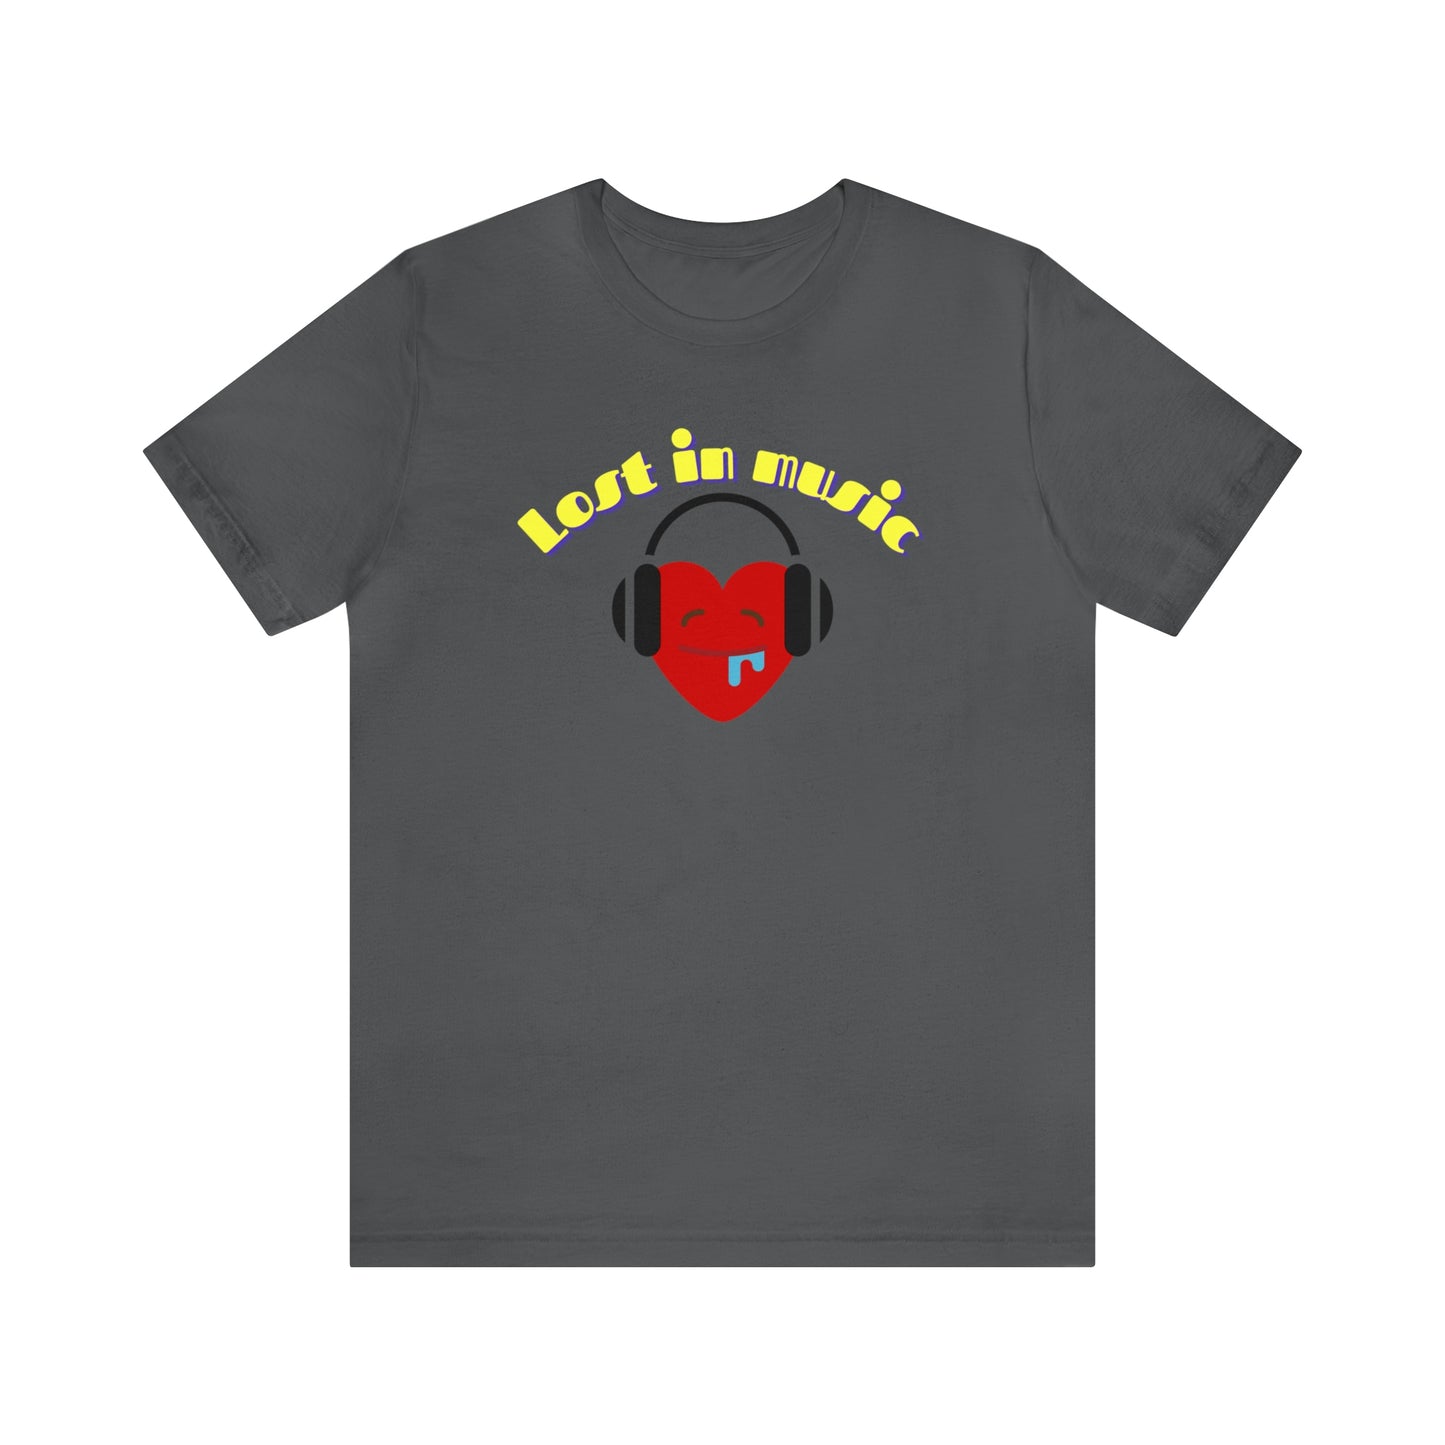 A T-shirt with the text "Lost in music" and a picture of a cartoon heart drooling while it's listening to music on its headphones